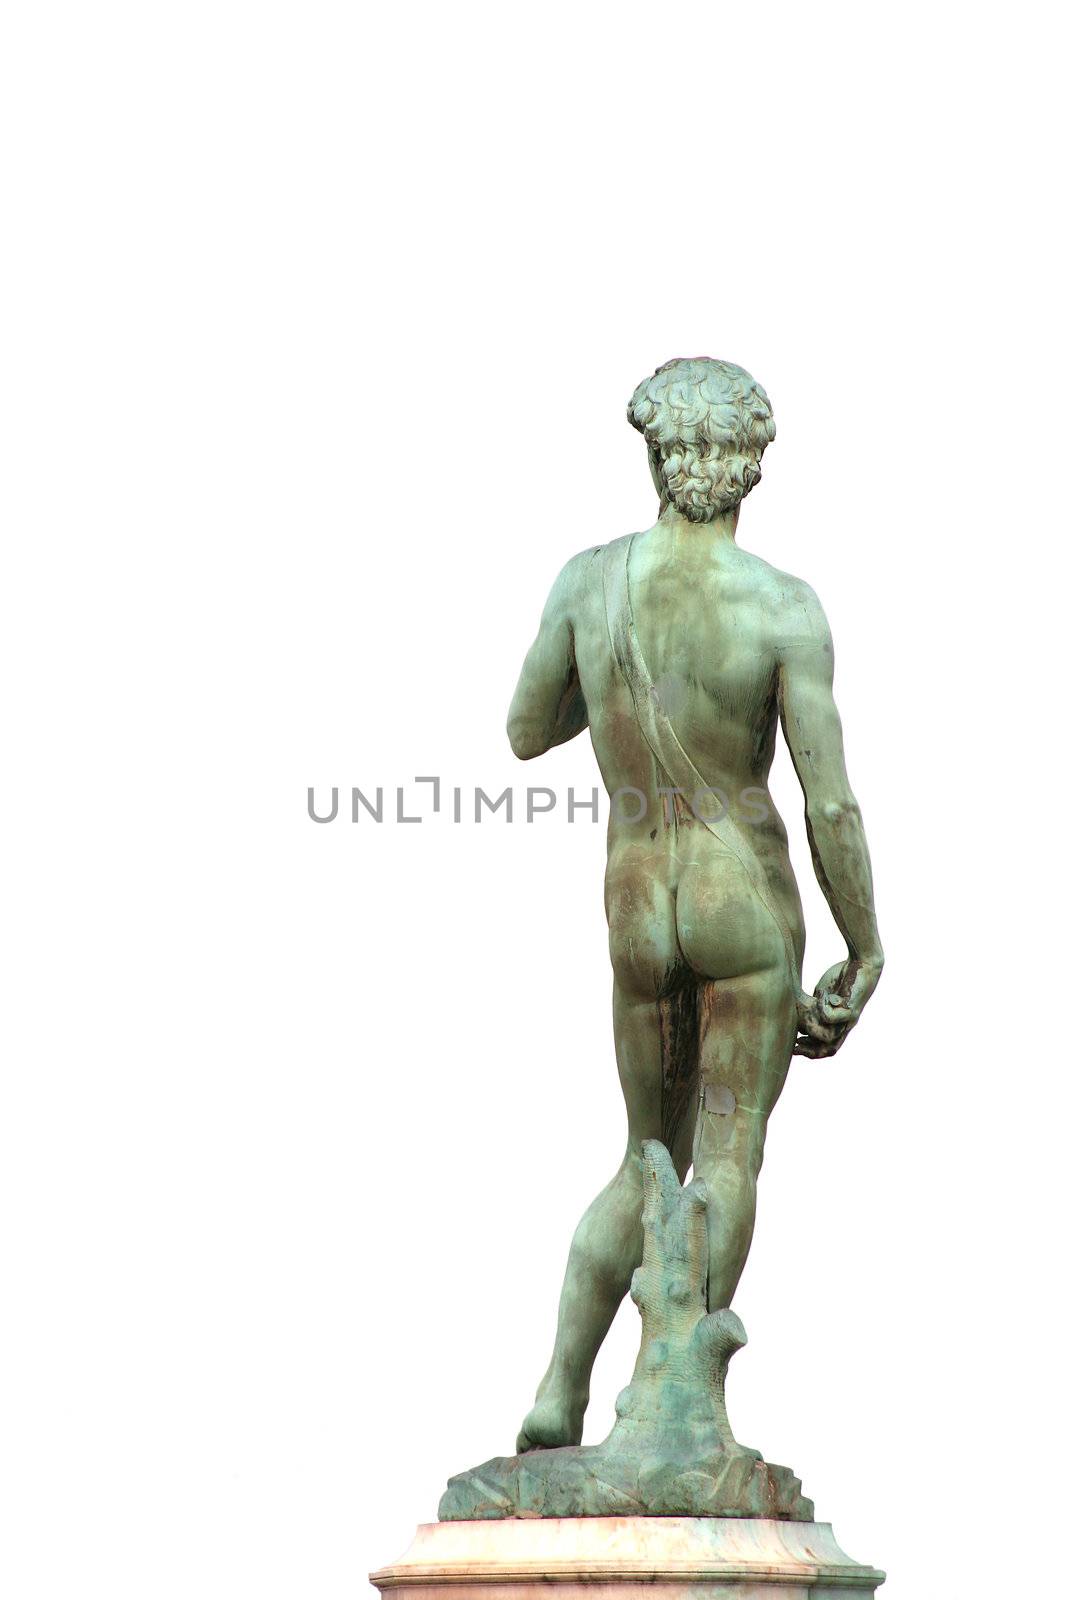  Statue of David by Michelangelo, isolated on white by cristiaciobanu